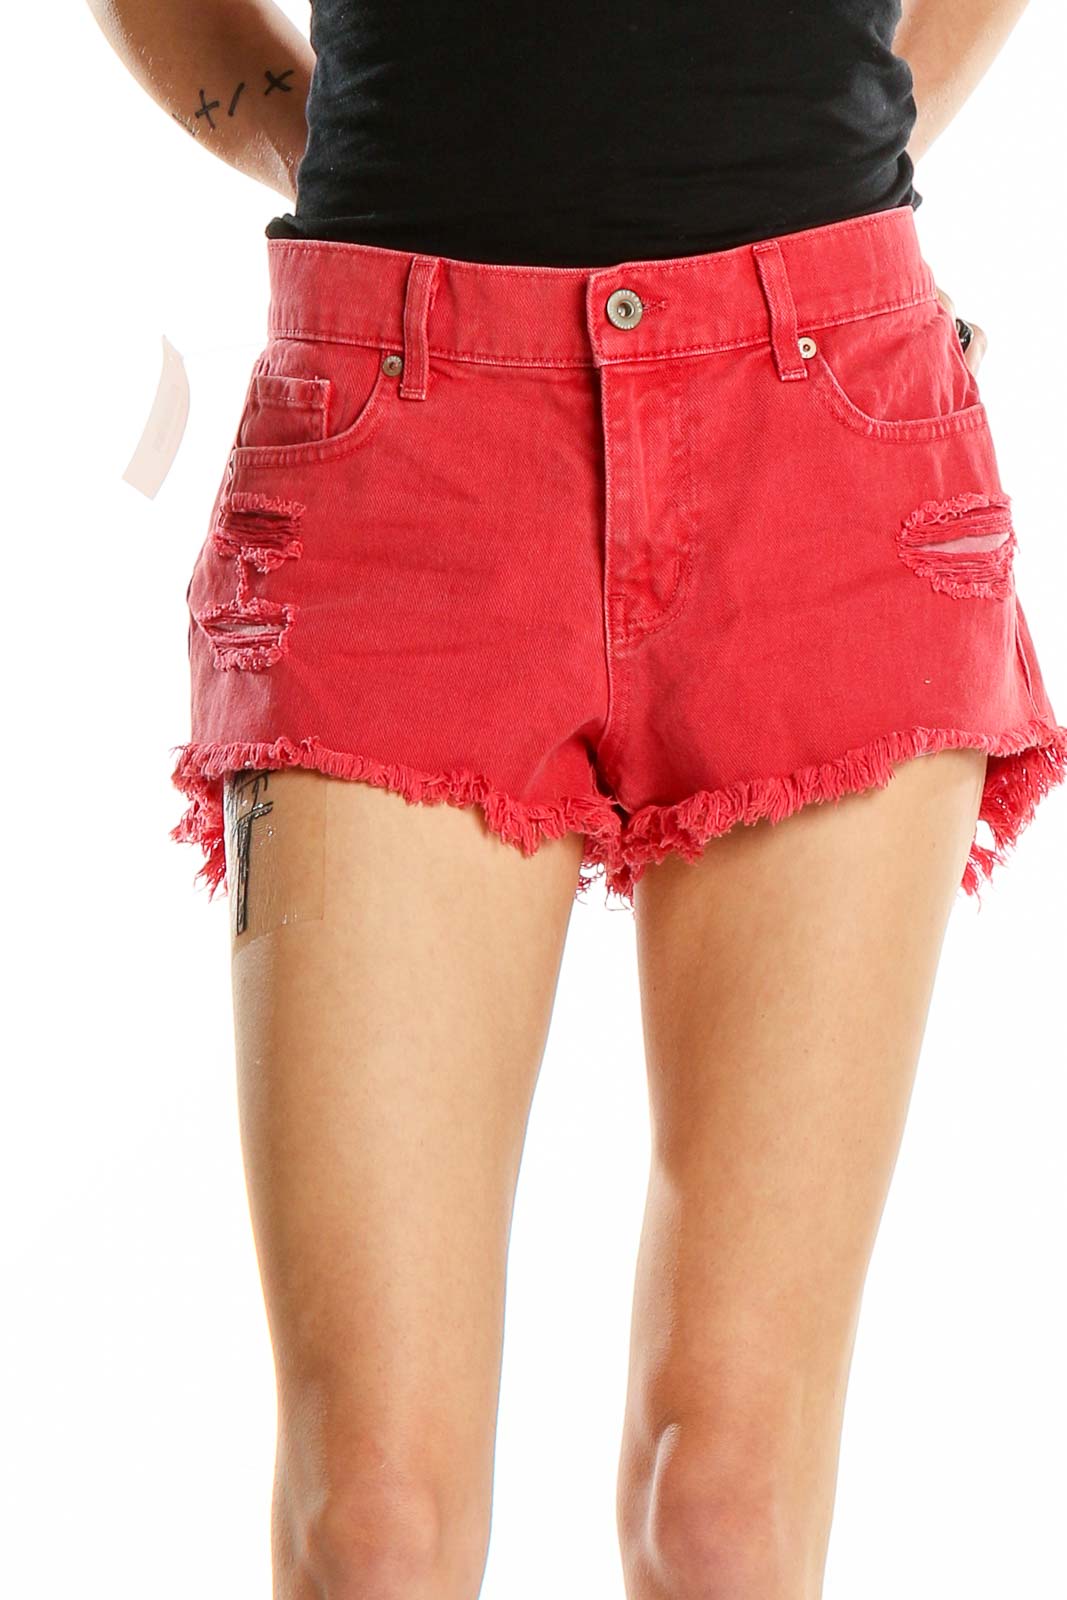 Shop Shorts With Points or Cash | SilkRoll